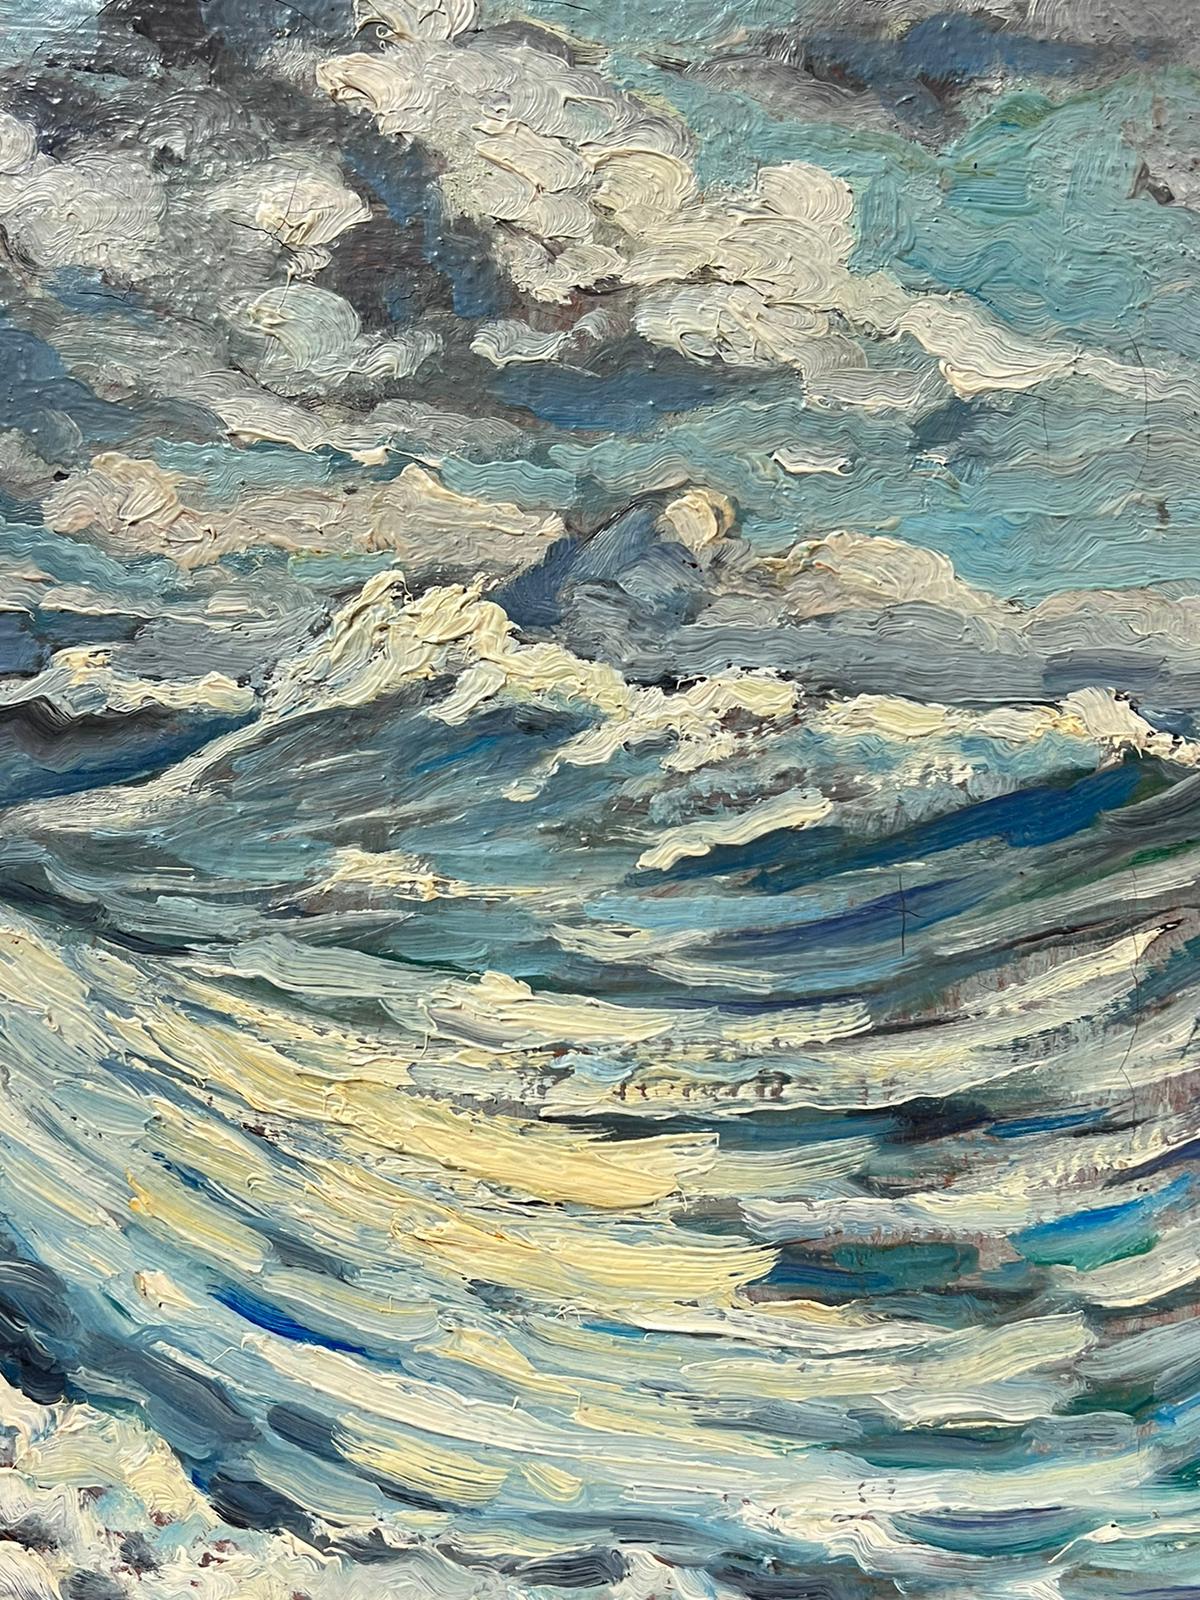 Stormy Seas
by Georges Bordonave (French contemporary) 
dated
signed oil painting on canvas, unframed
canvas: 15 x 18.5 inches
condition: very good
provenance: from a large private collection of this artists work, western Paris, France. 